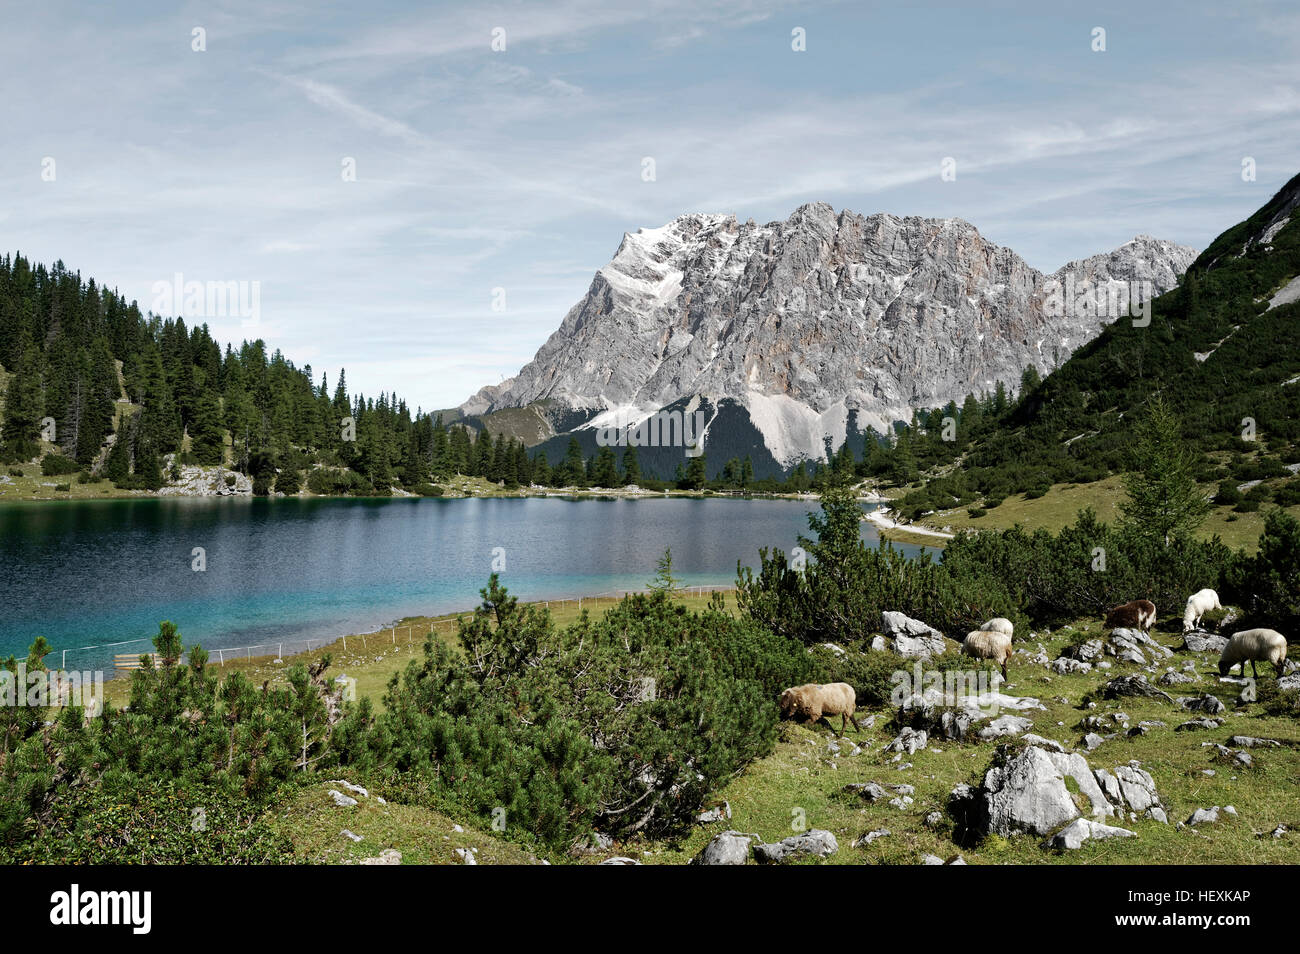 Austria, Tyrol, Ehrwald, Seebensee with Zugspitze in the background Stock Photo